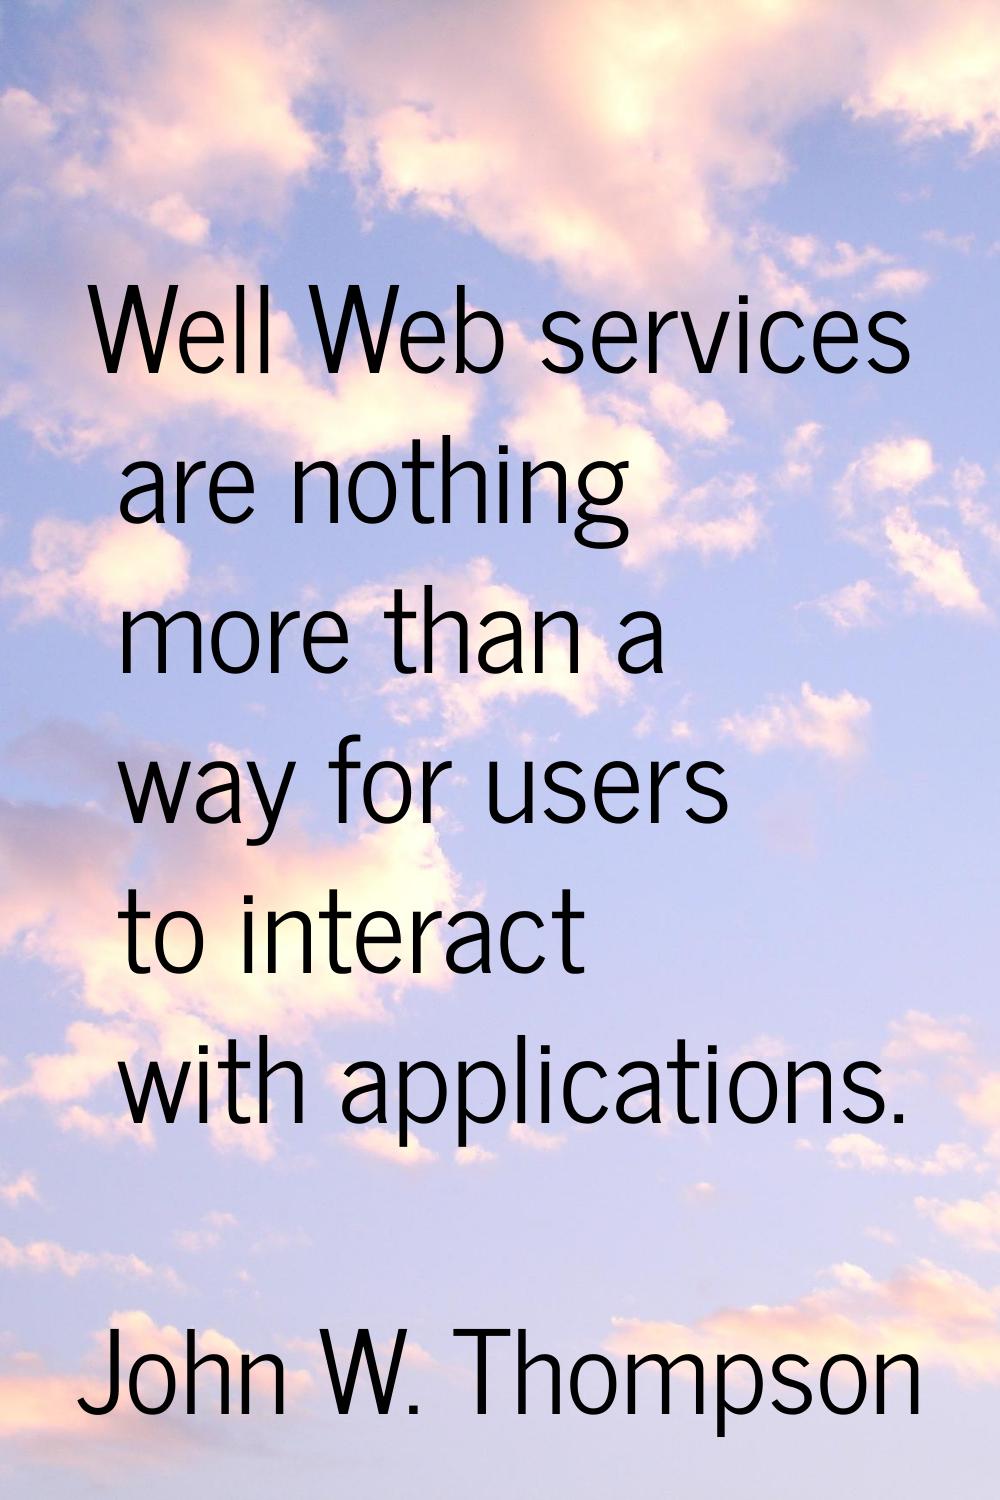 Well Web services are nothing more than a way for users to interact with applications.